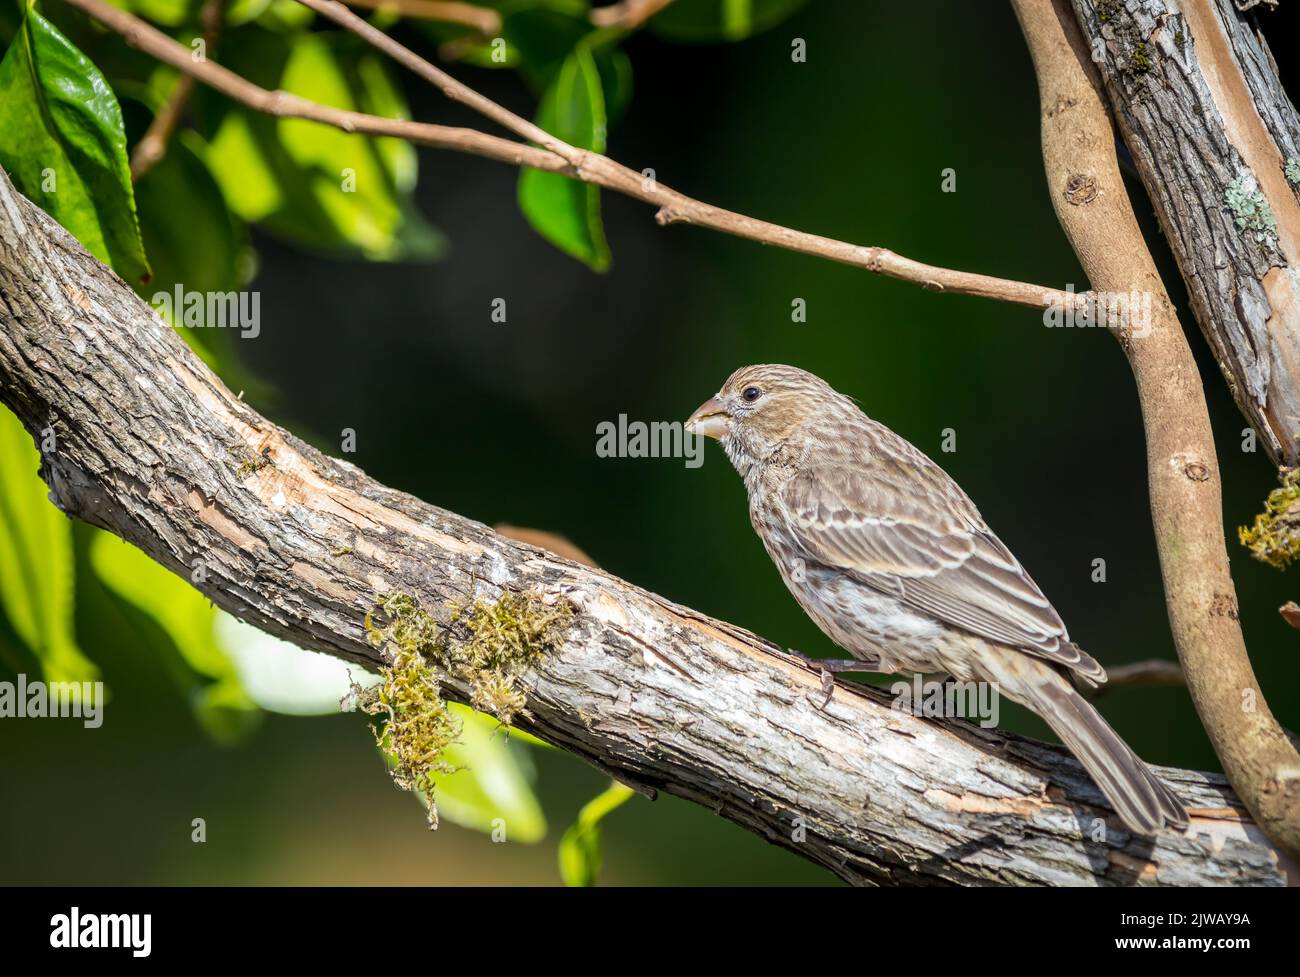 A house finch ' Haemorhous mexicanus ' looks for food on tree branches Stock Photo